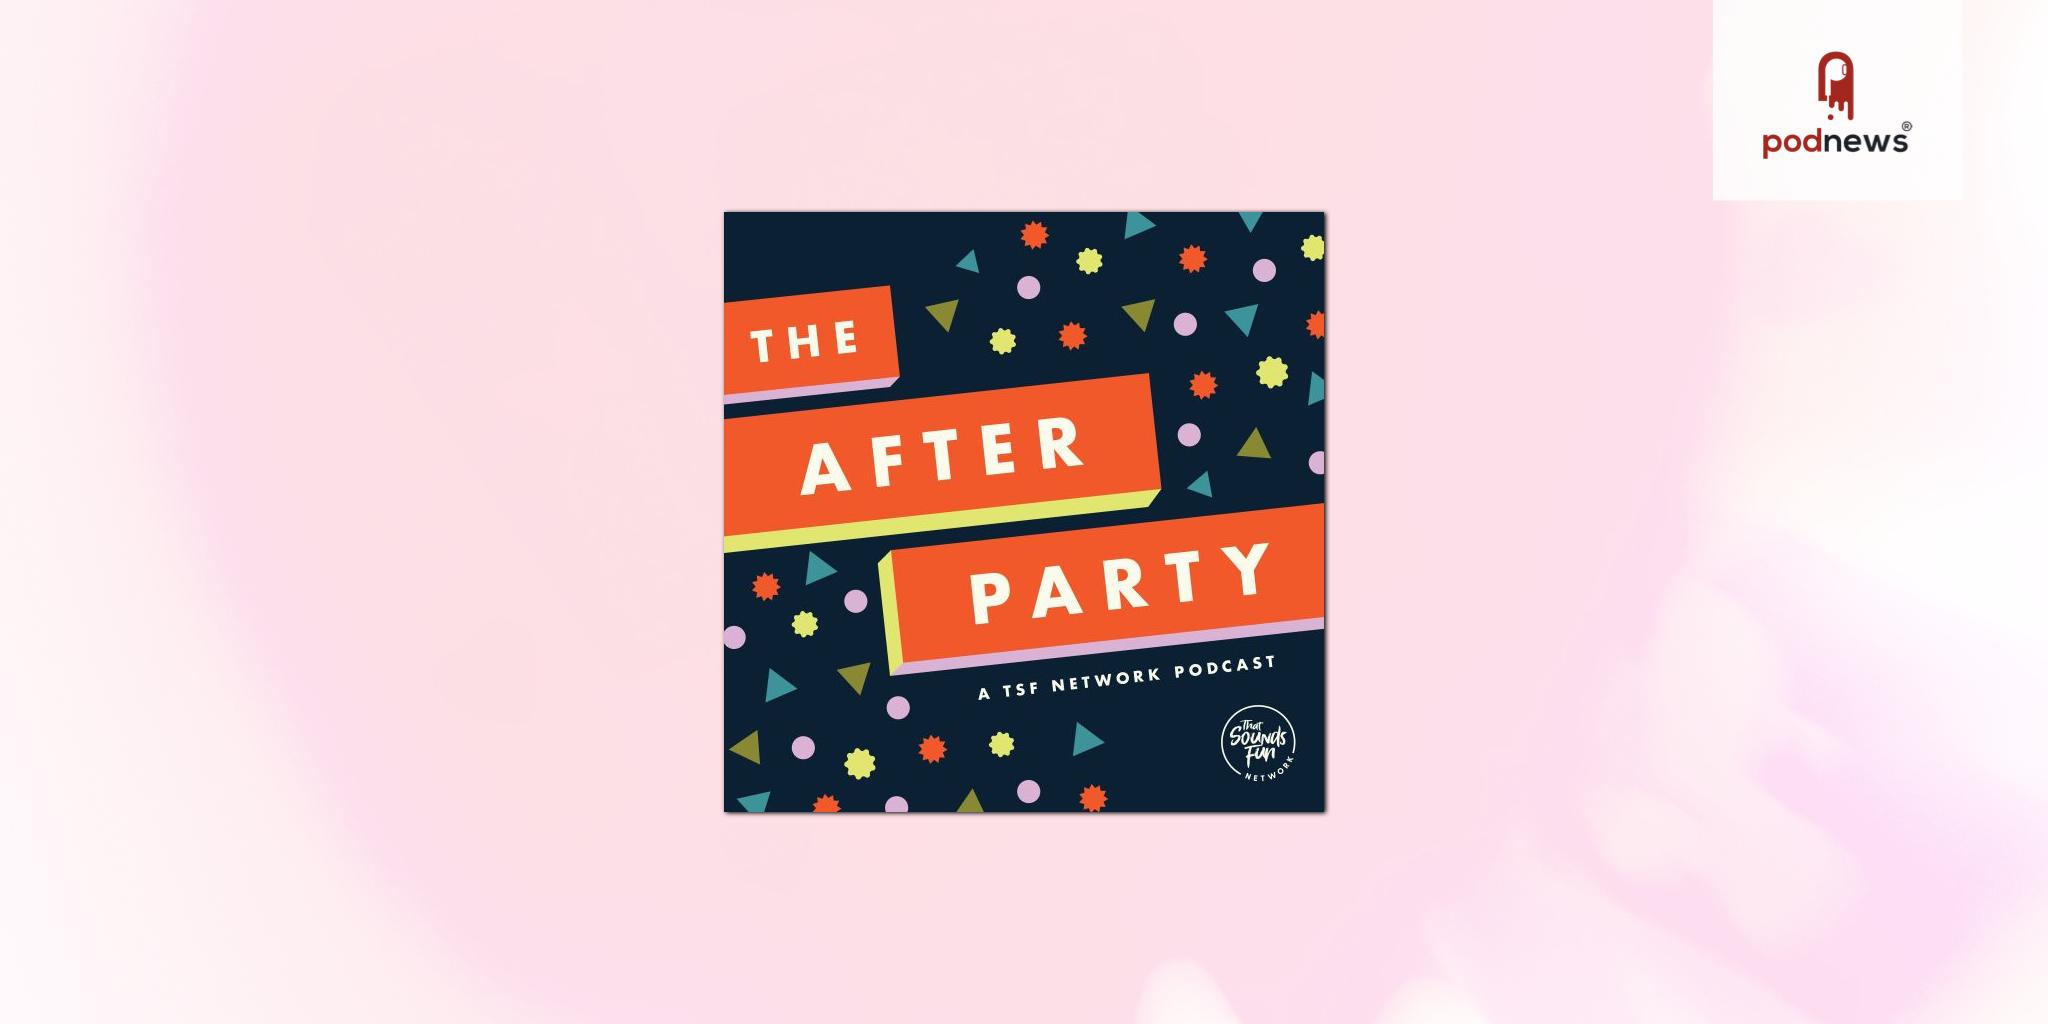 That Sounds Fun Network Launches Their Newest In-House Podcast, The After Party